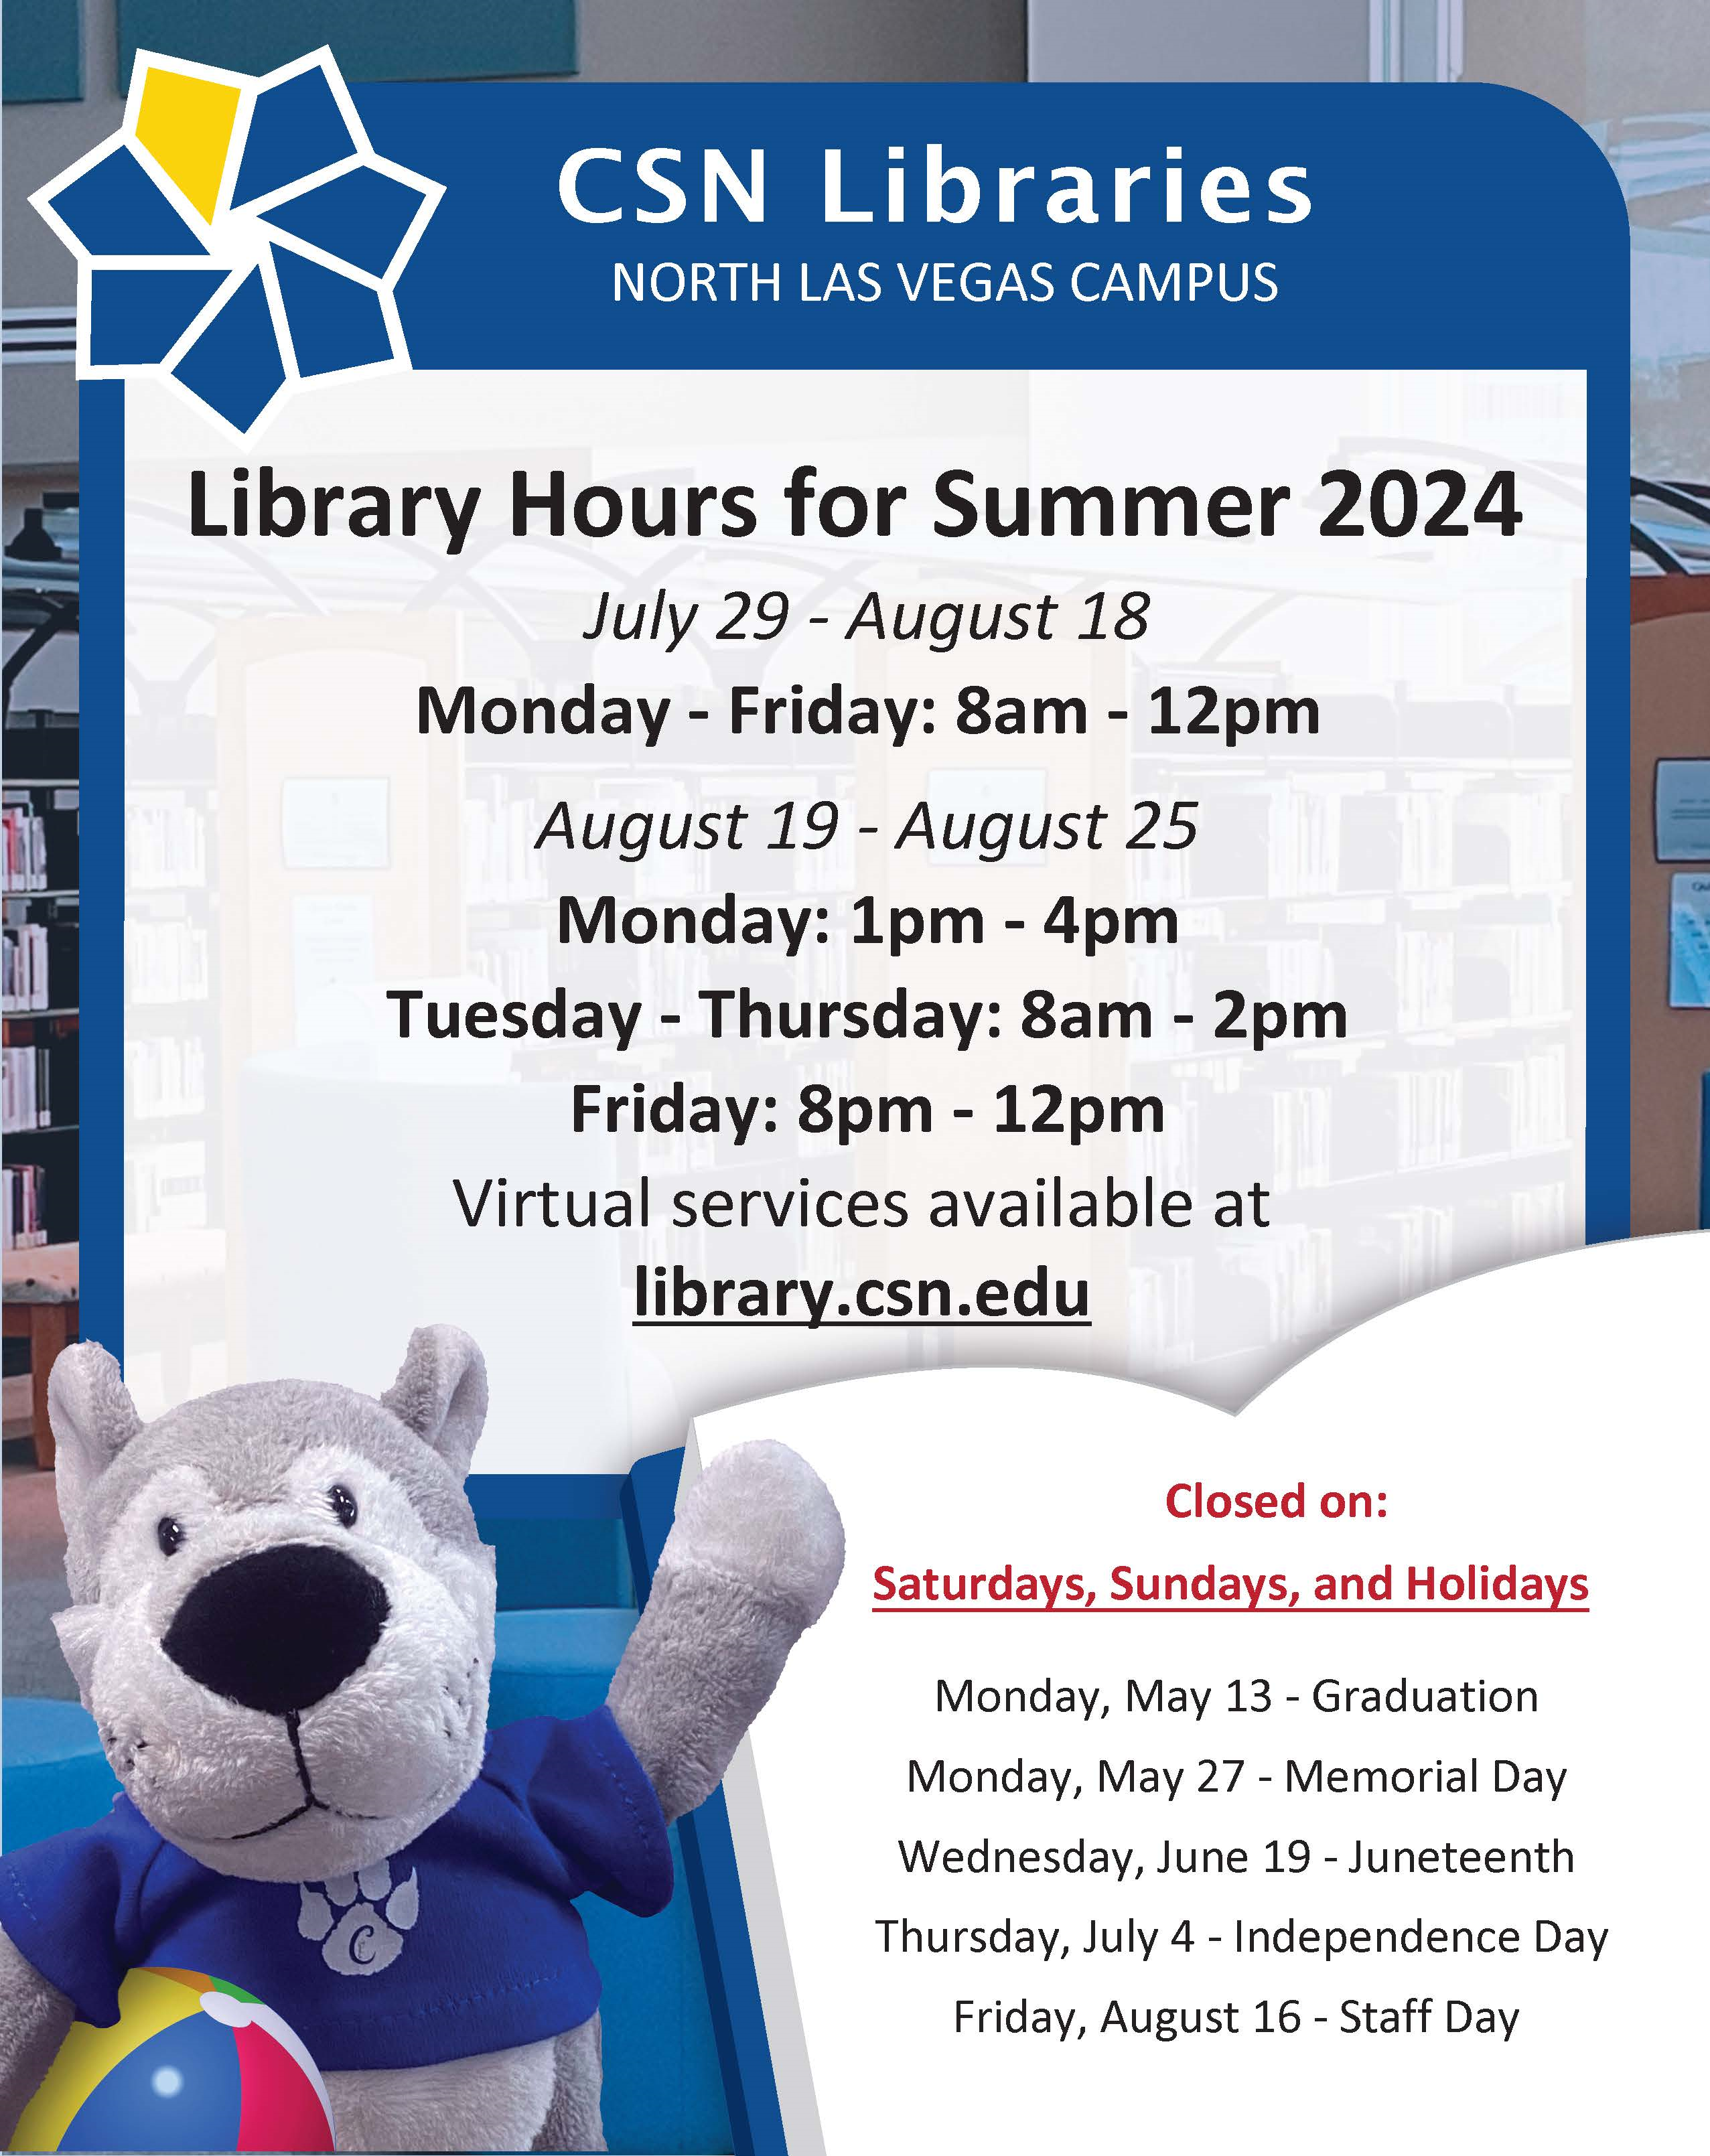 CSN Libraries Summer Hours - North Las Vegas Campus - July 29-August 25